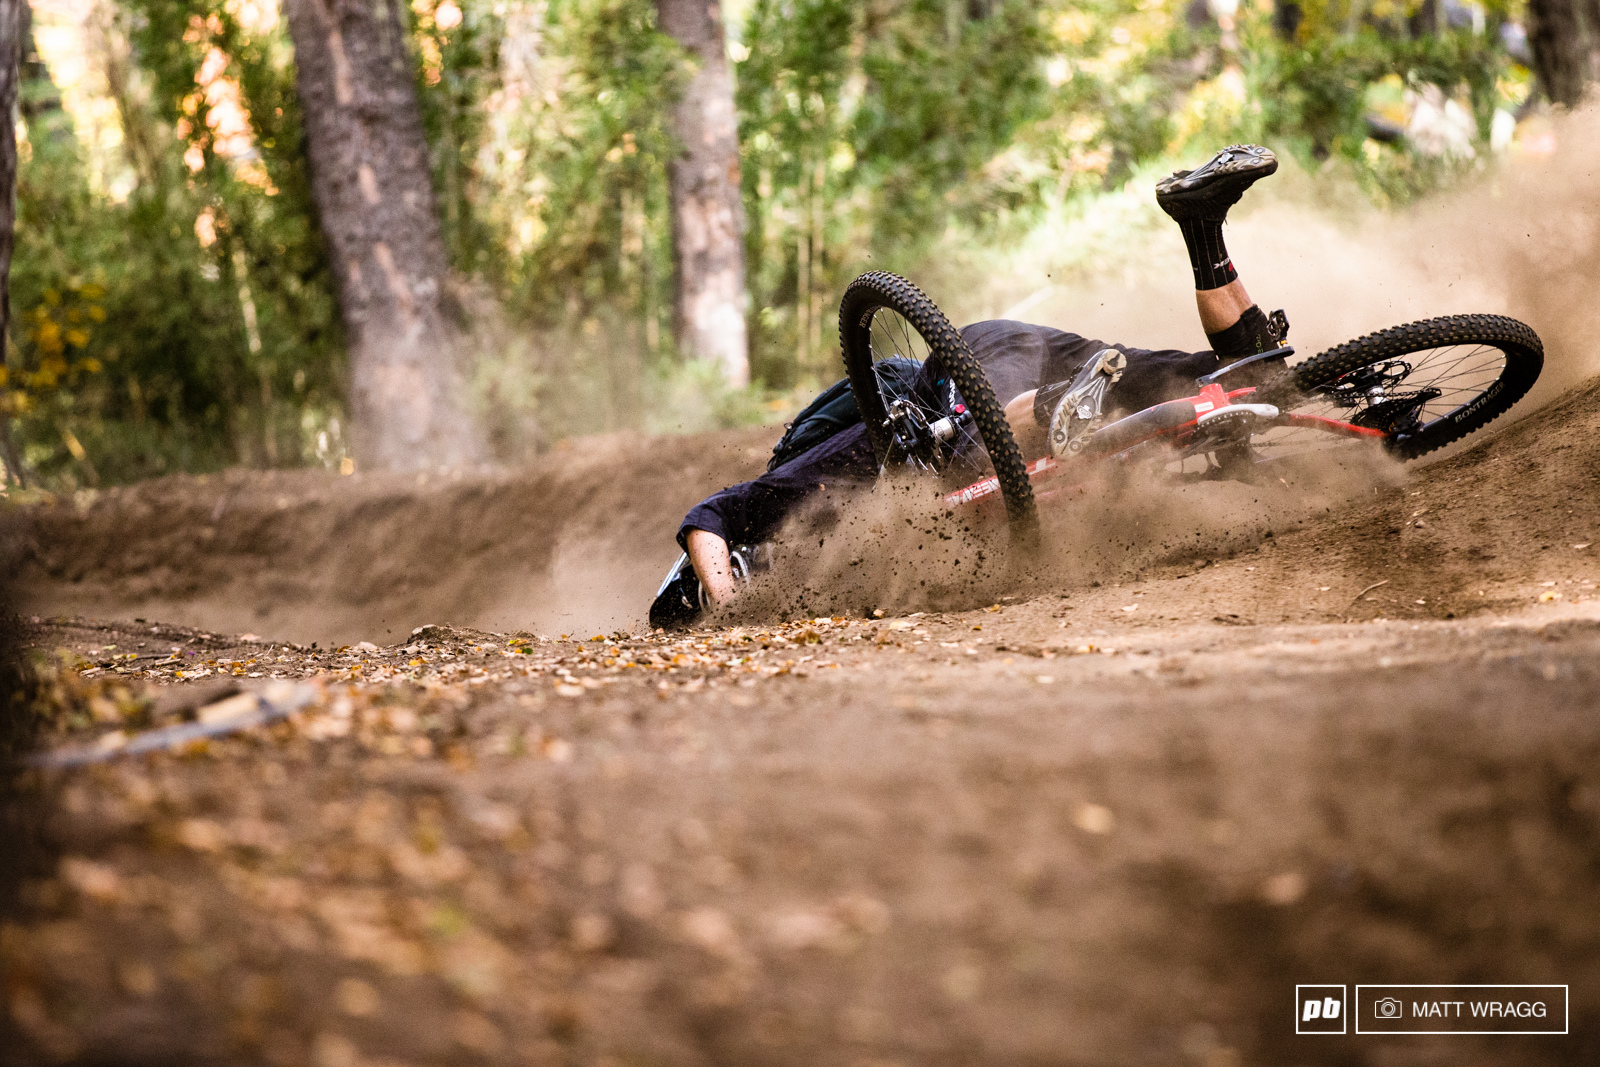 Jeremey Horgen-Kobelski didn't fare too well on the bike park stage today.